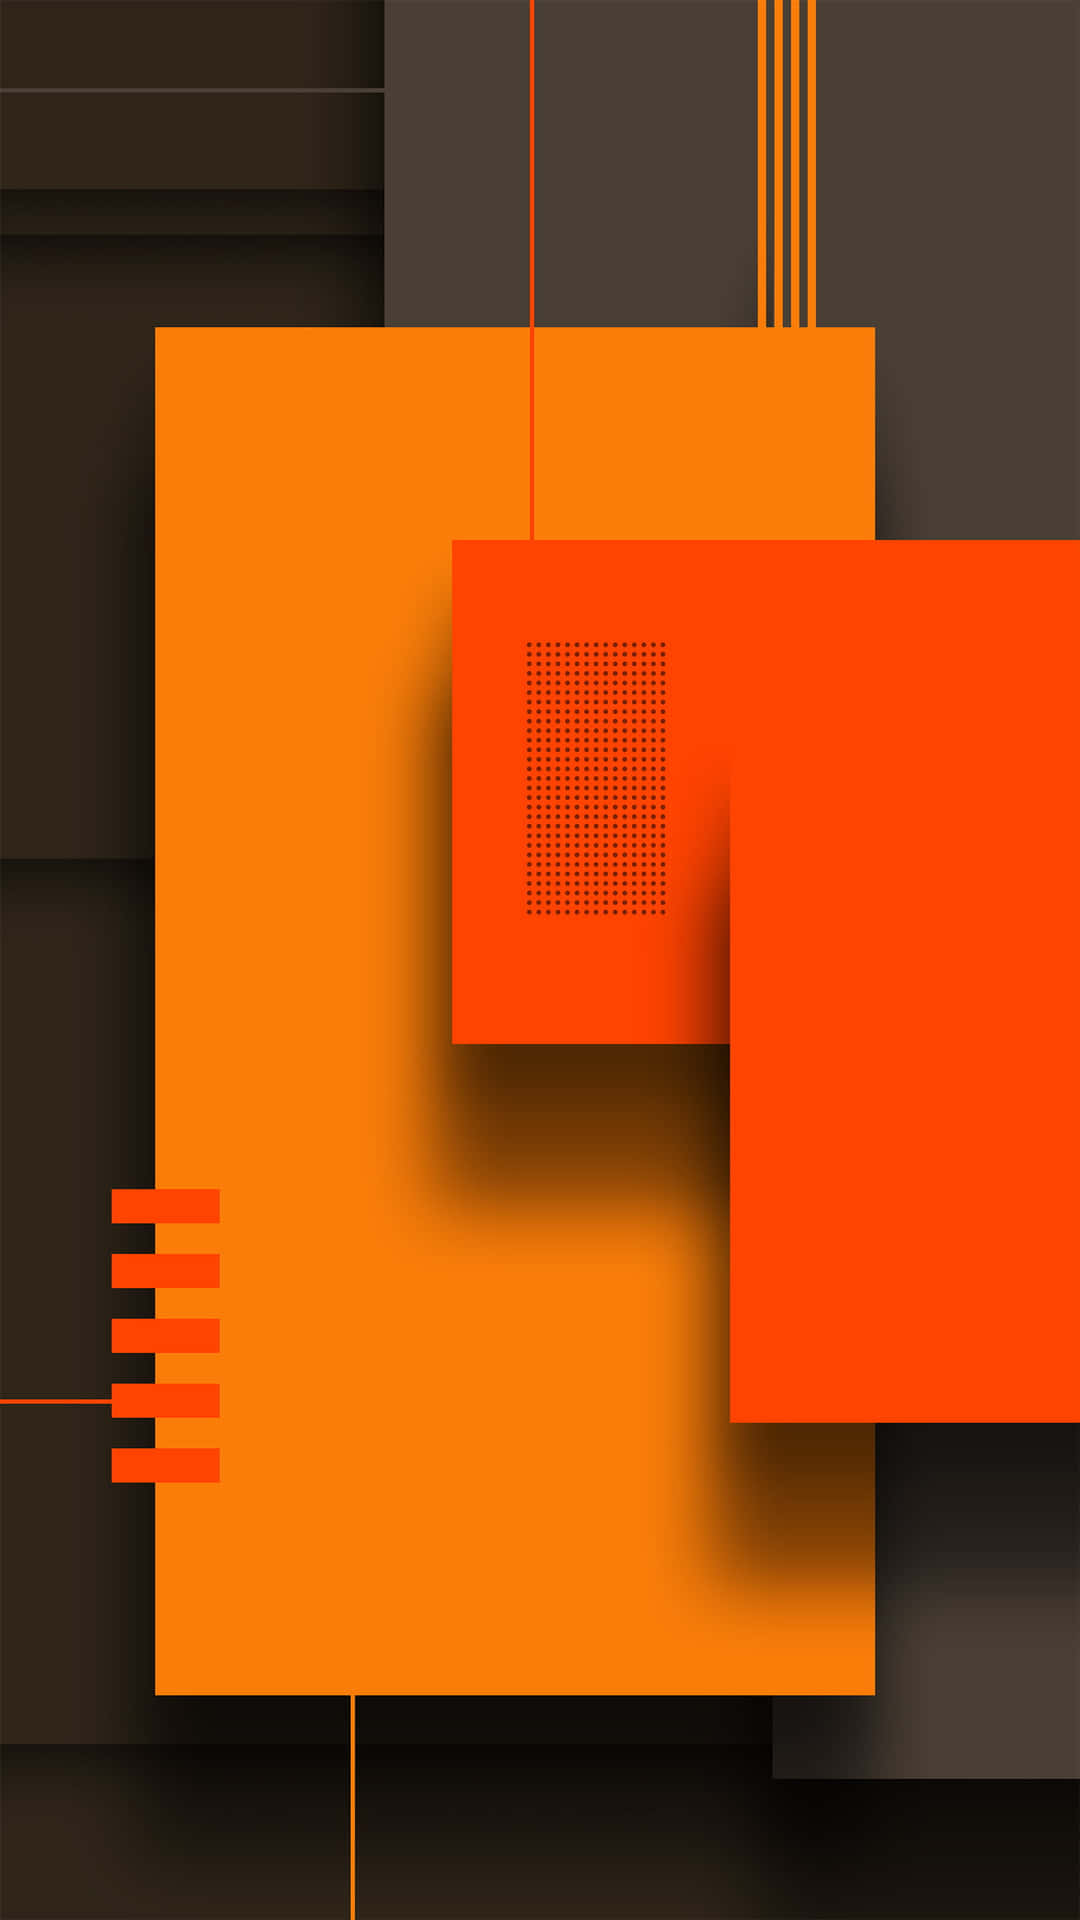 abstract orange and black geometric background